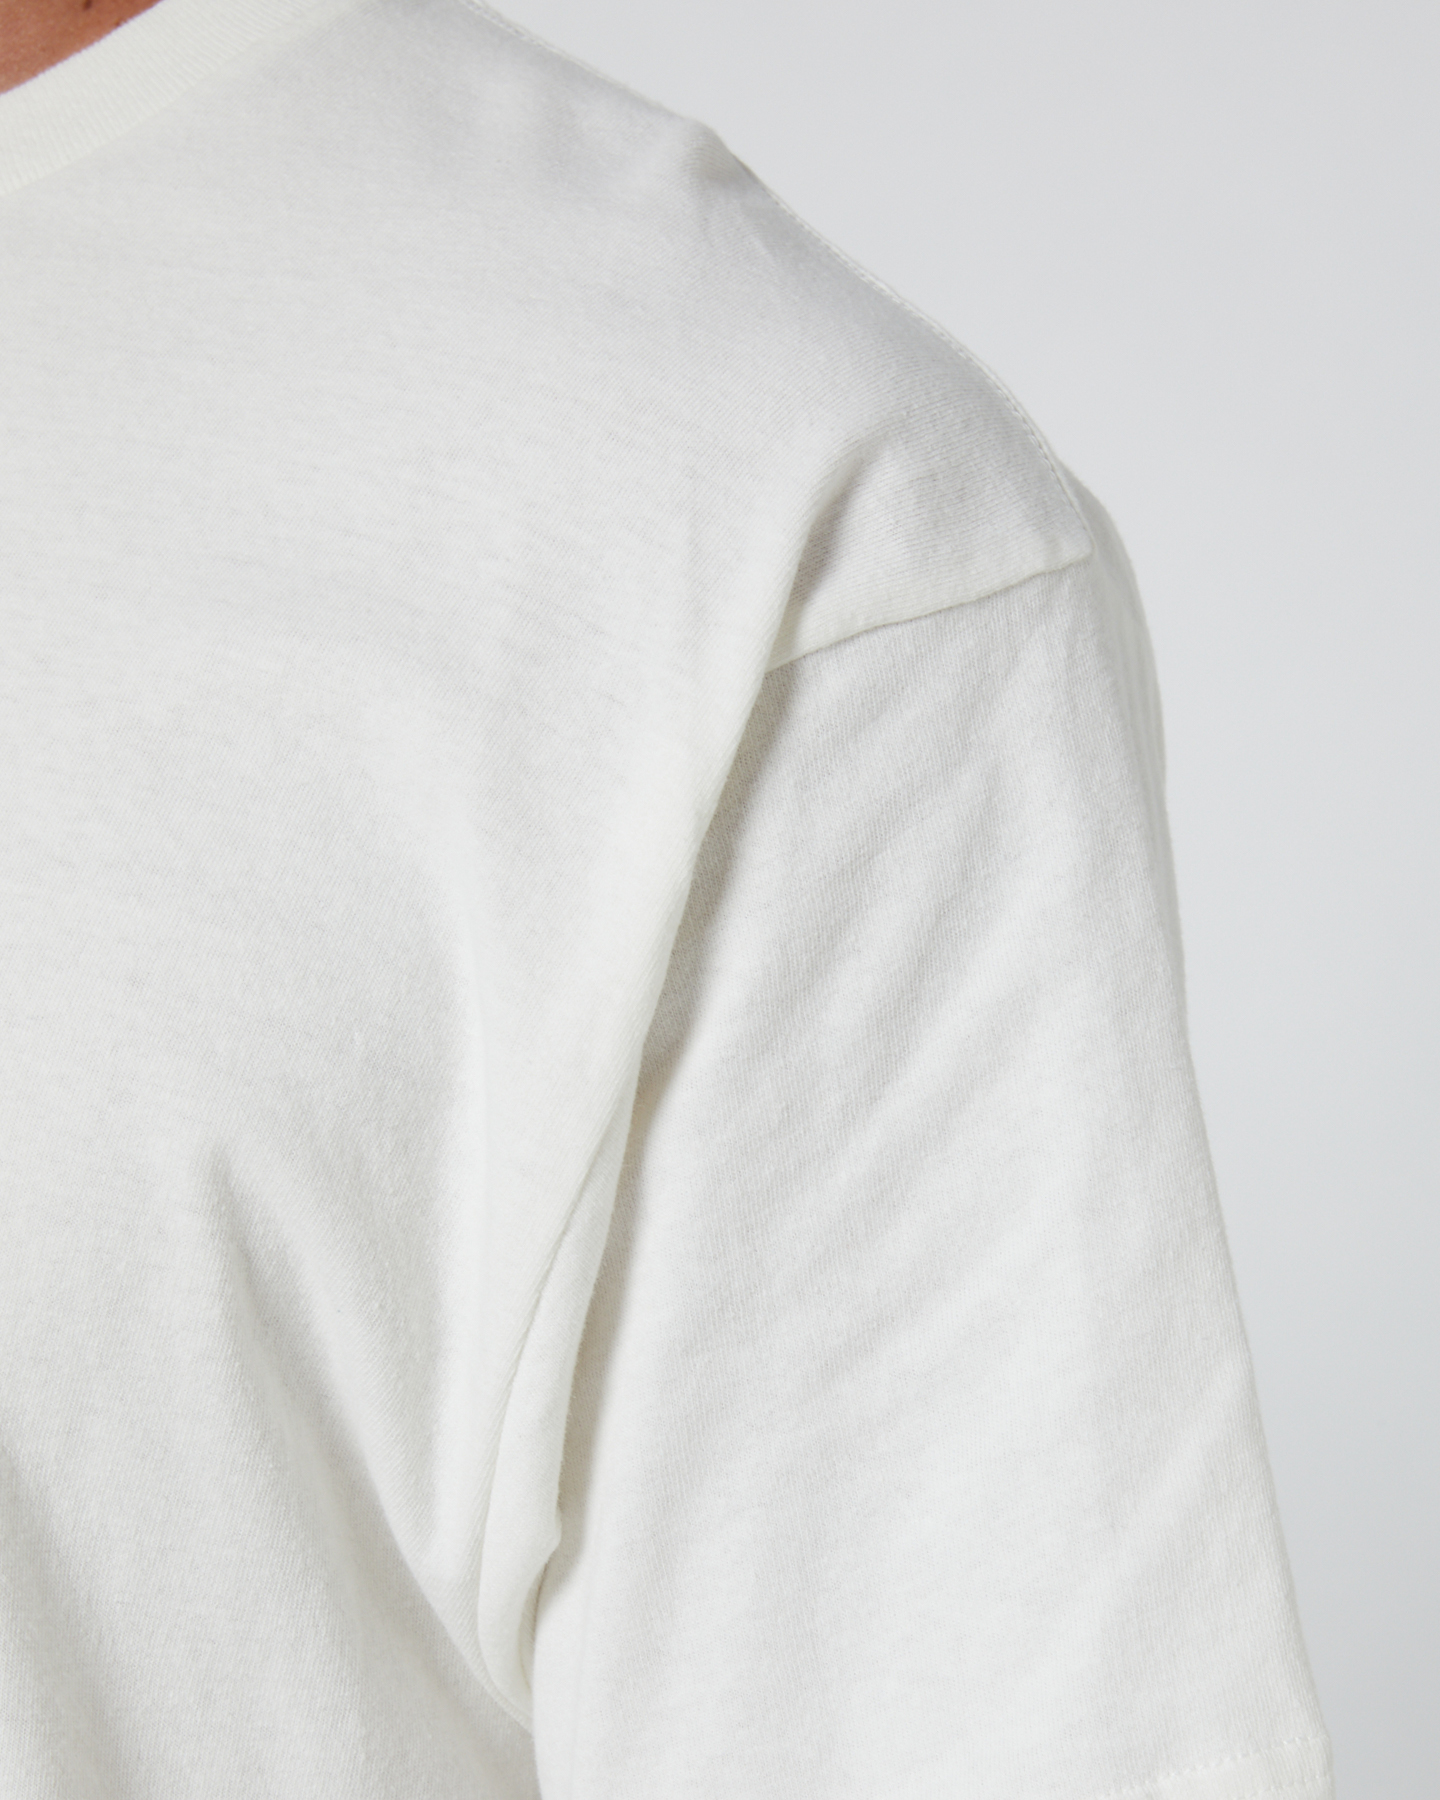 Volcom Combust Lse Tee - Off White | SurfStitch